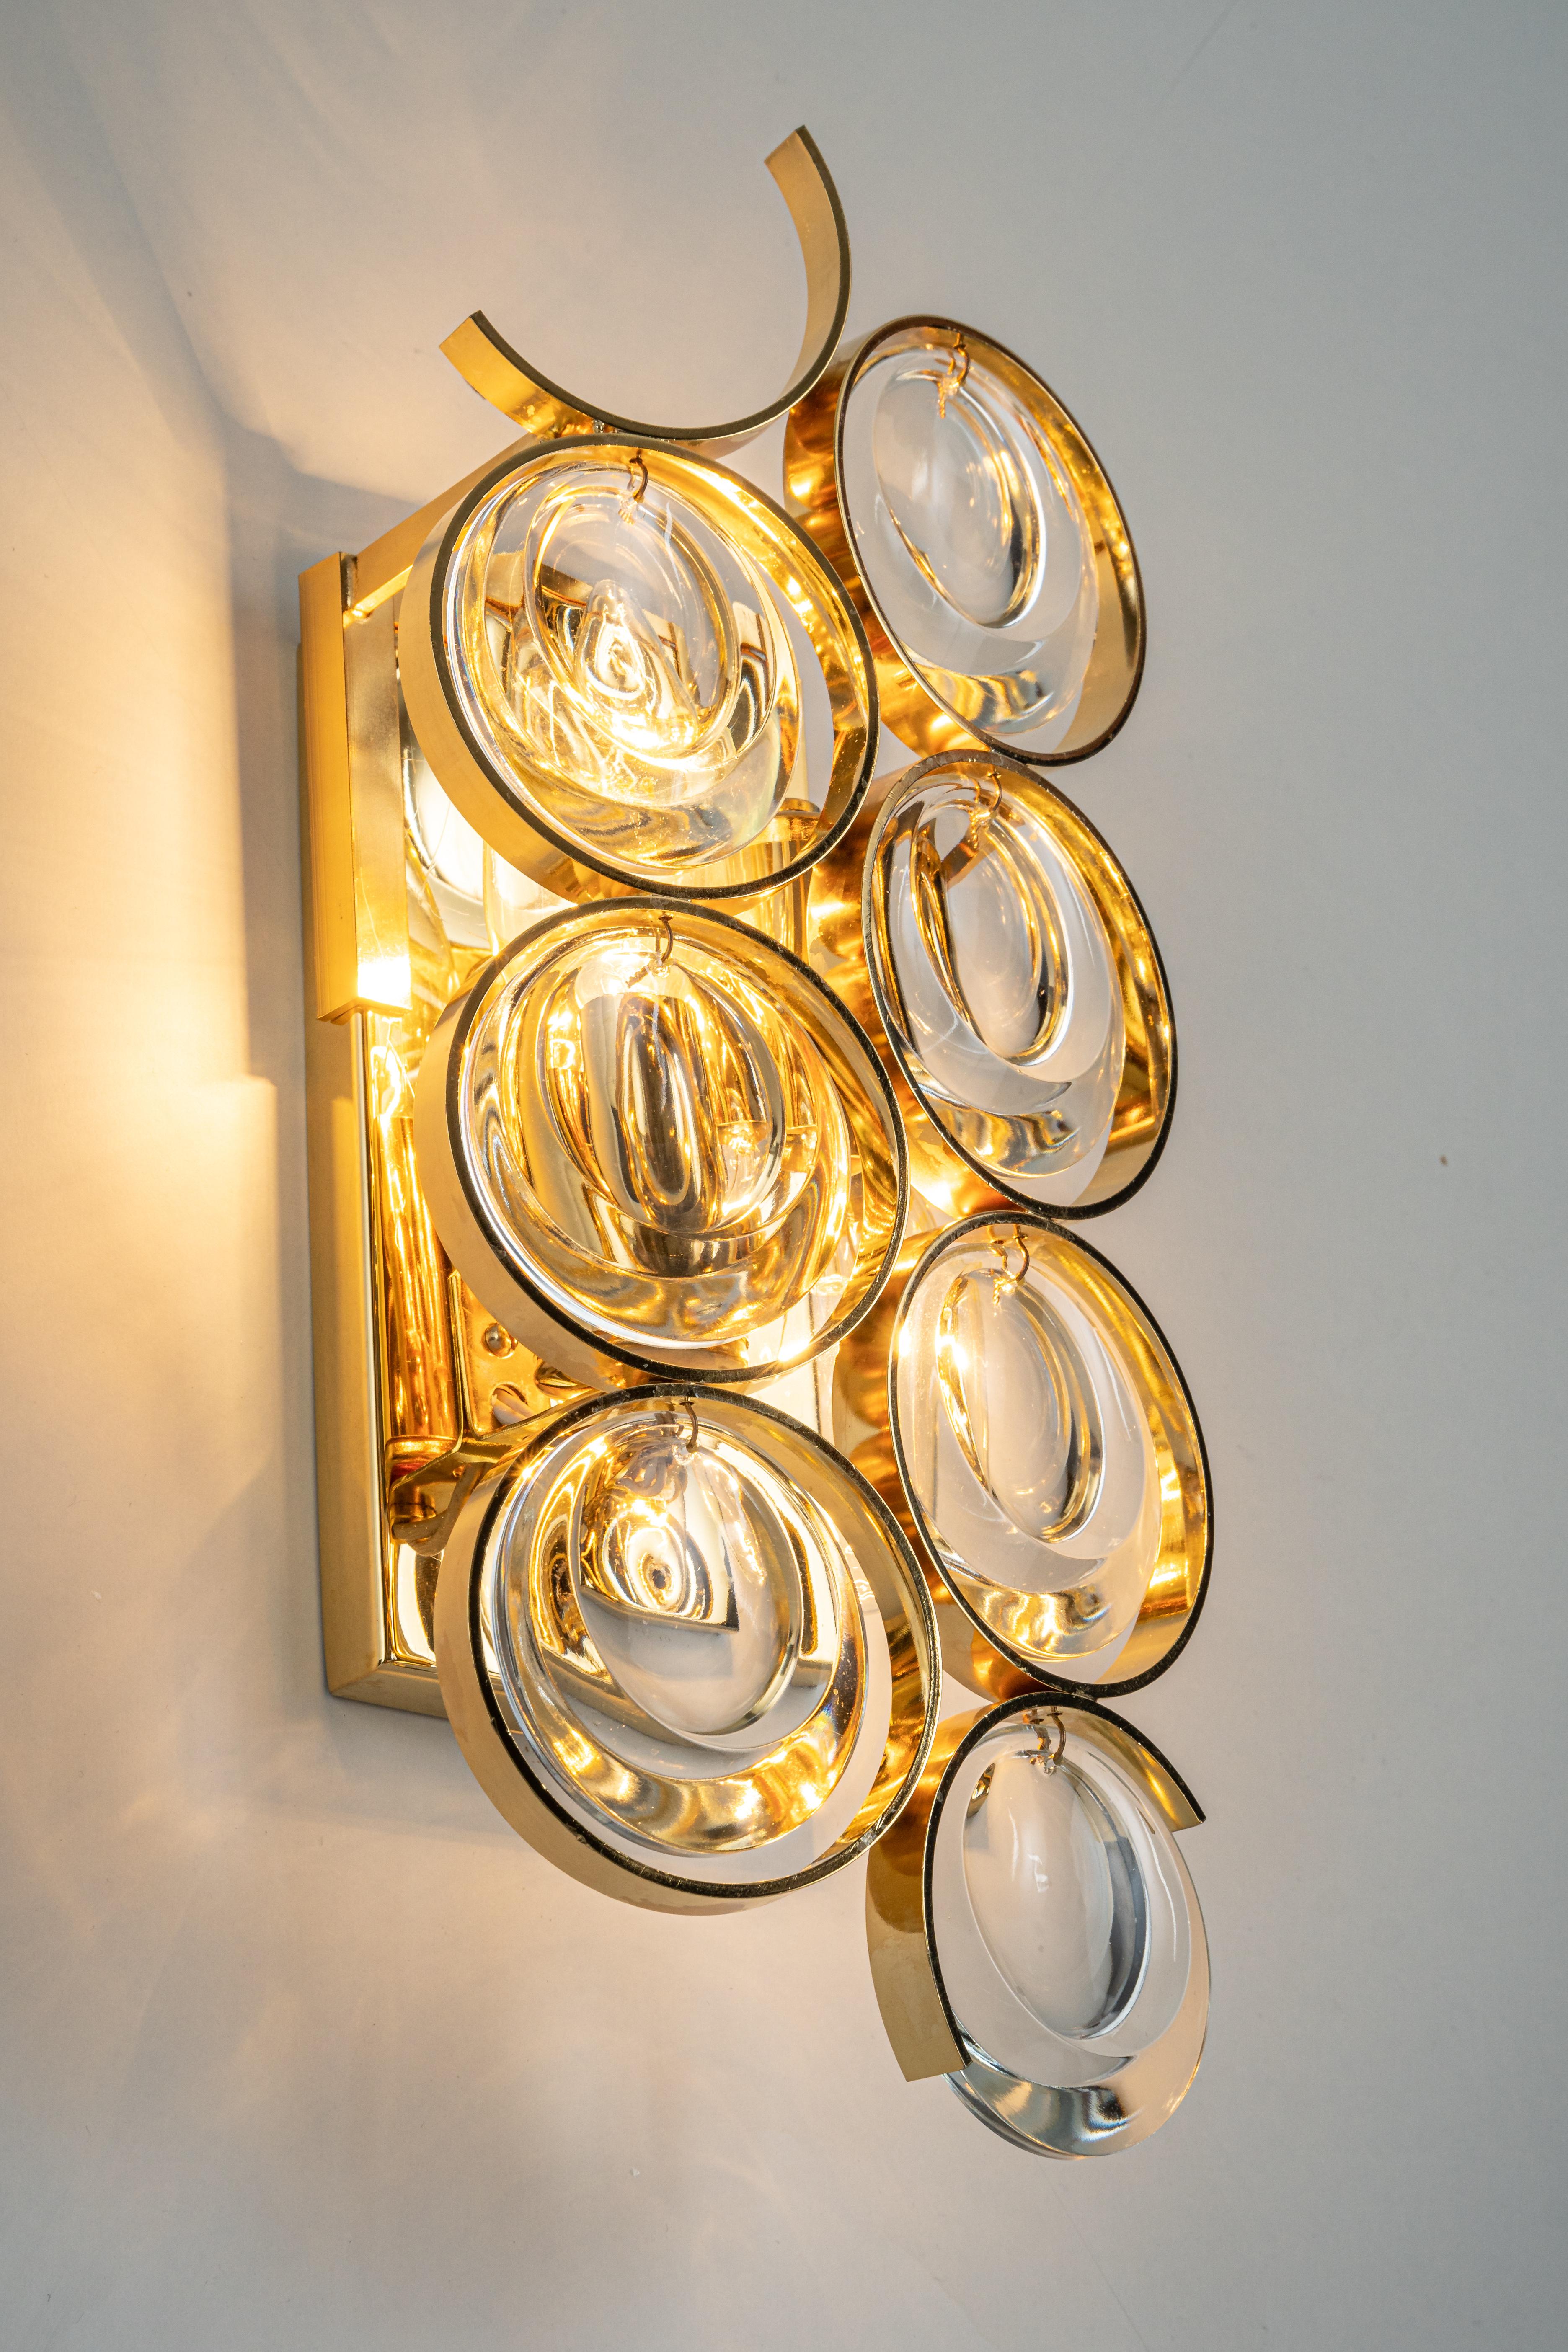 1 of 2 Pairs of Golden Gilded Brass and Crystal Sconce by Palwa, Germany, 1960s For Sale 1